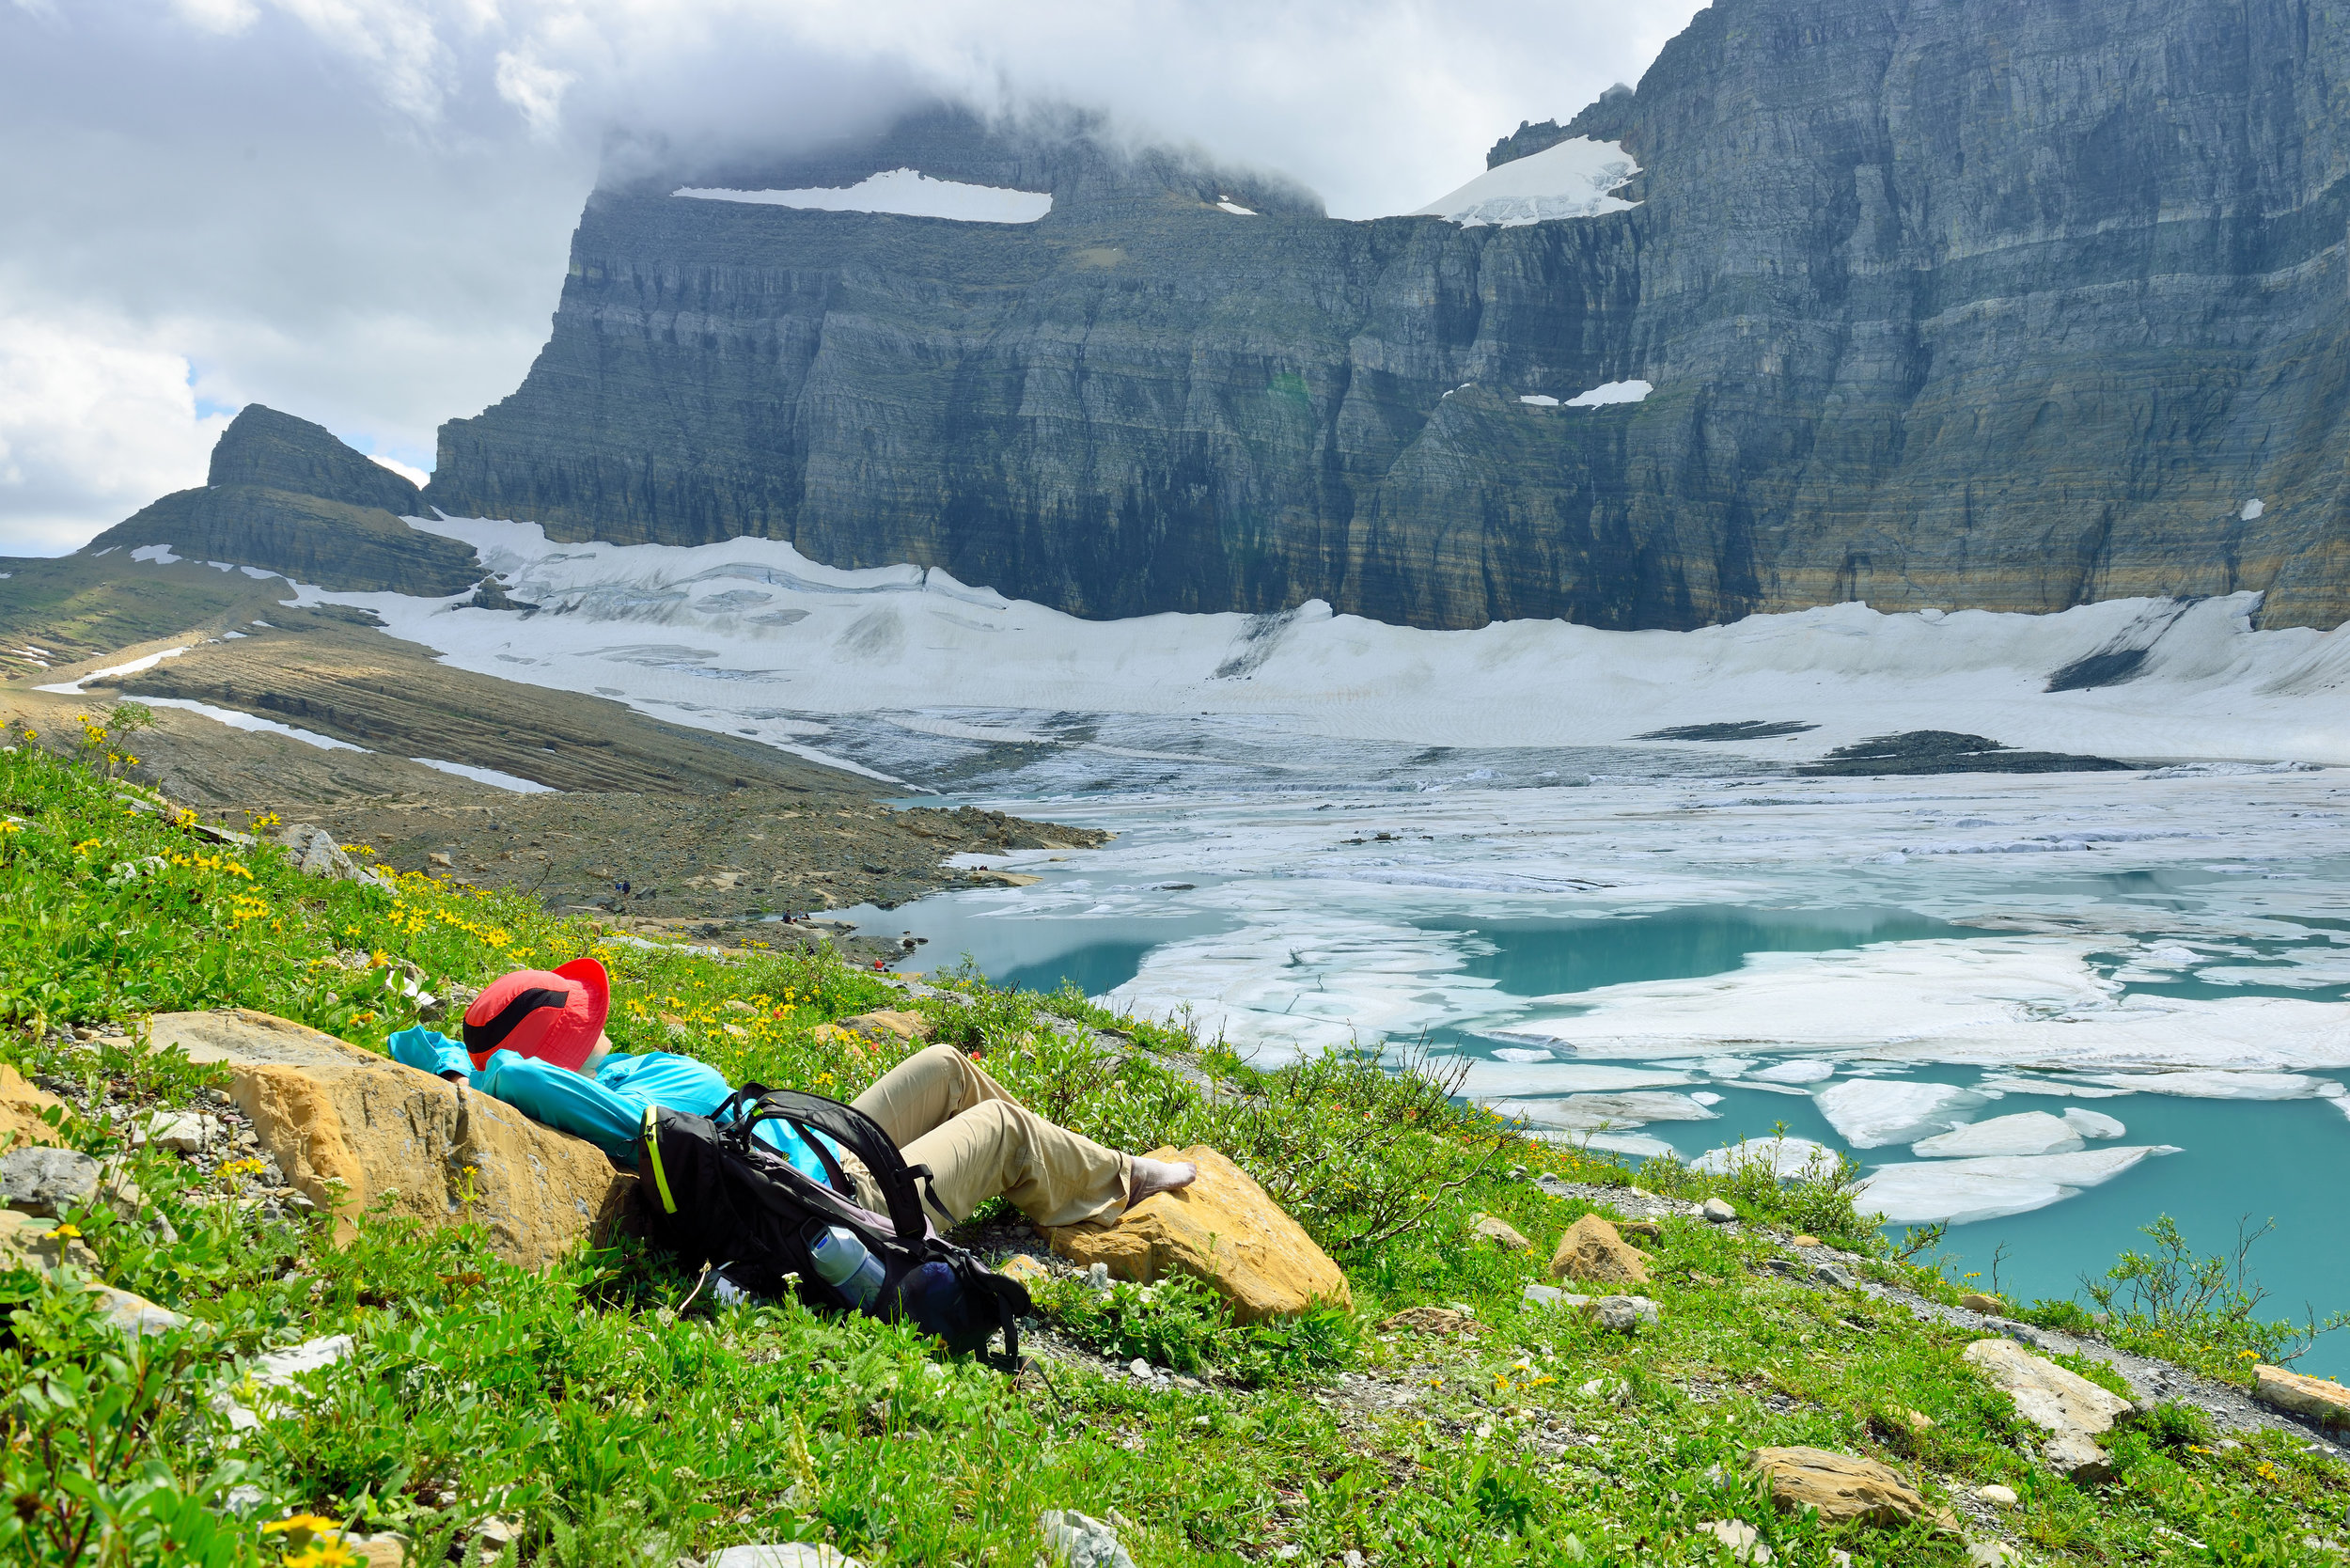 PICTURED: female hiker resting by the Grinnell glacier in Many Glaciers, Glacier National Park, Montana in summer. North American glaciers are the most at risk, the study suggests.